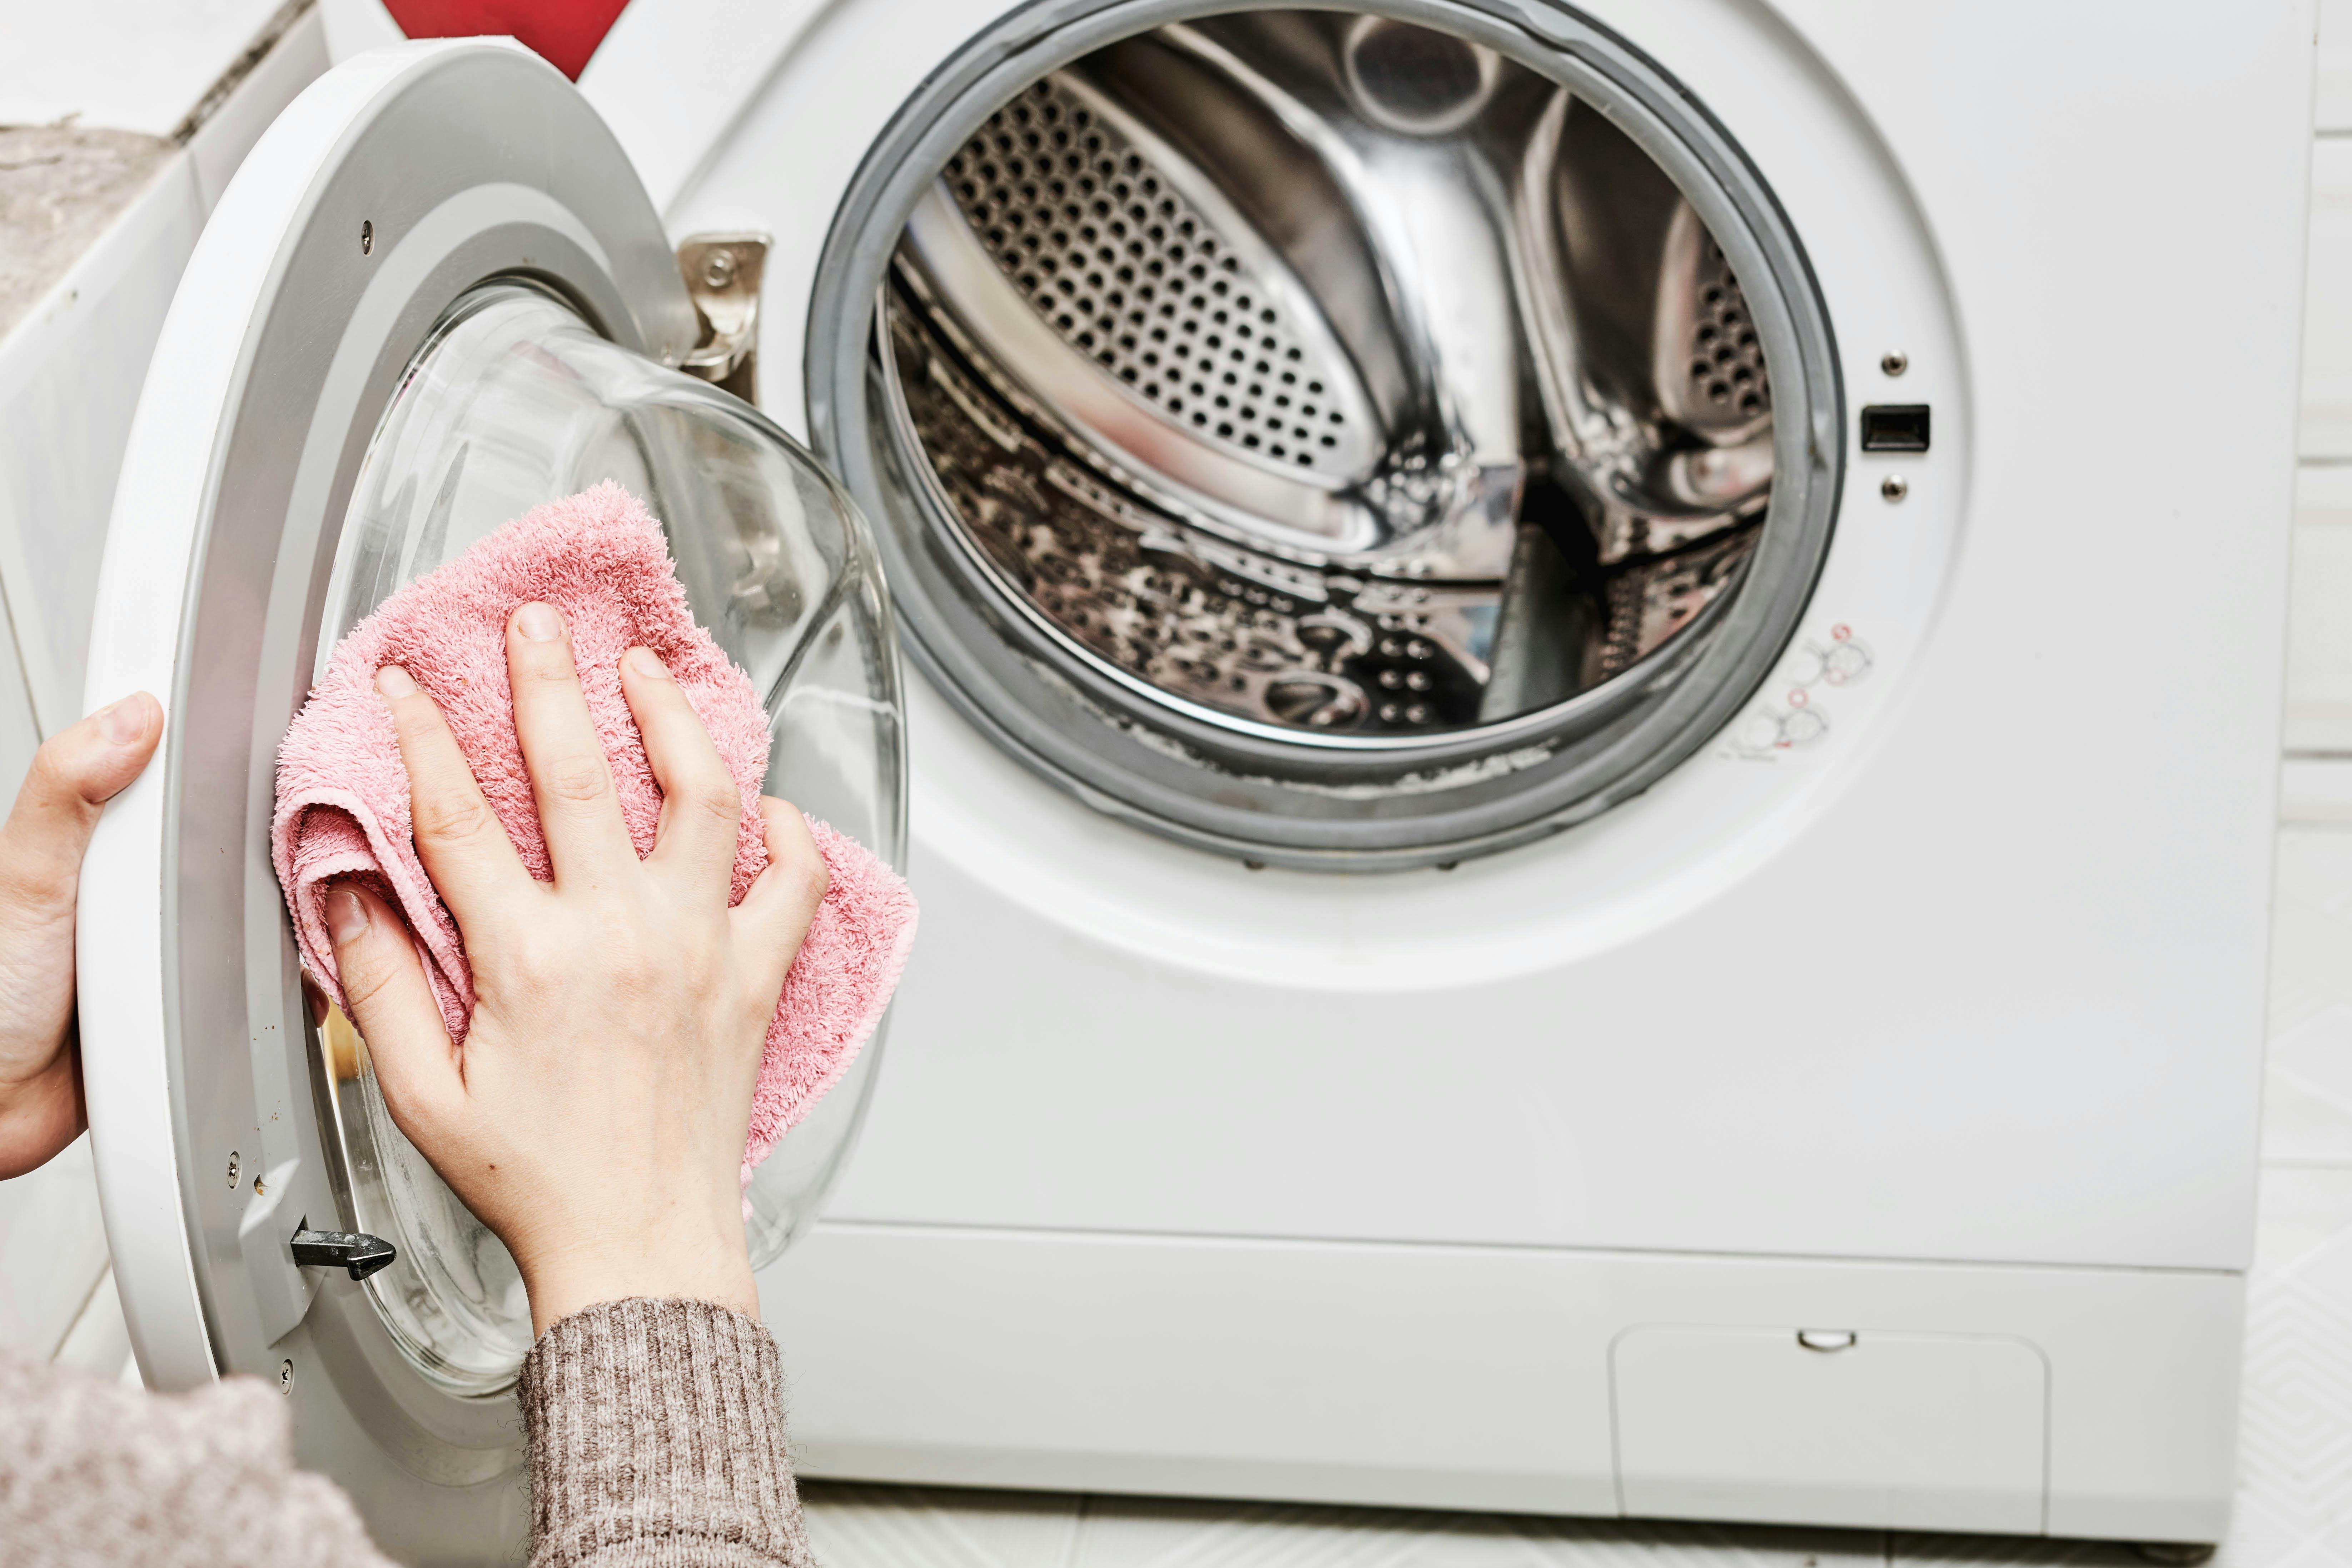 A woman wipes down her washing machine with a cloth.